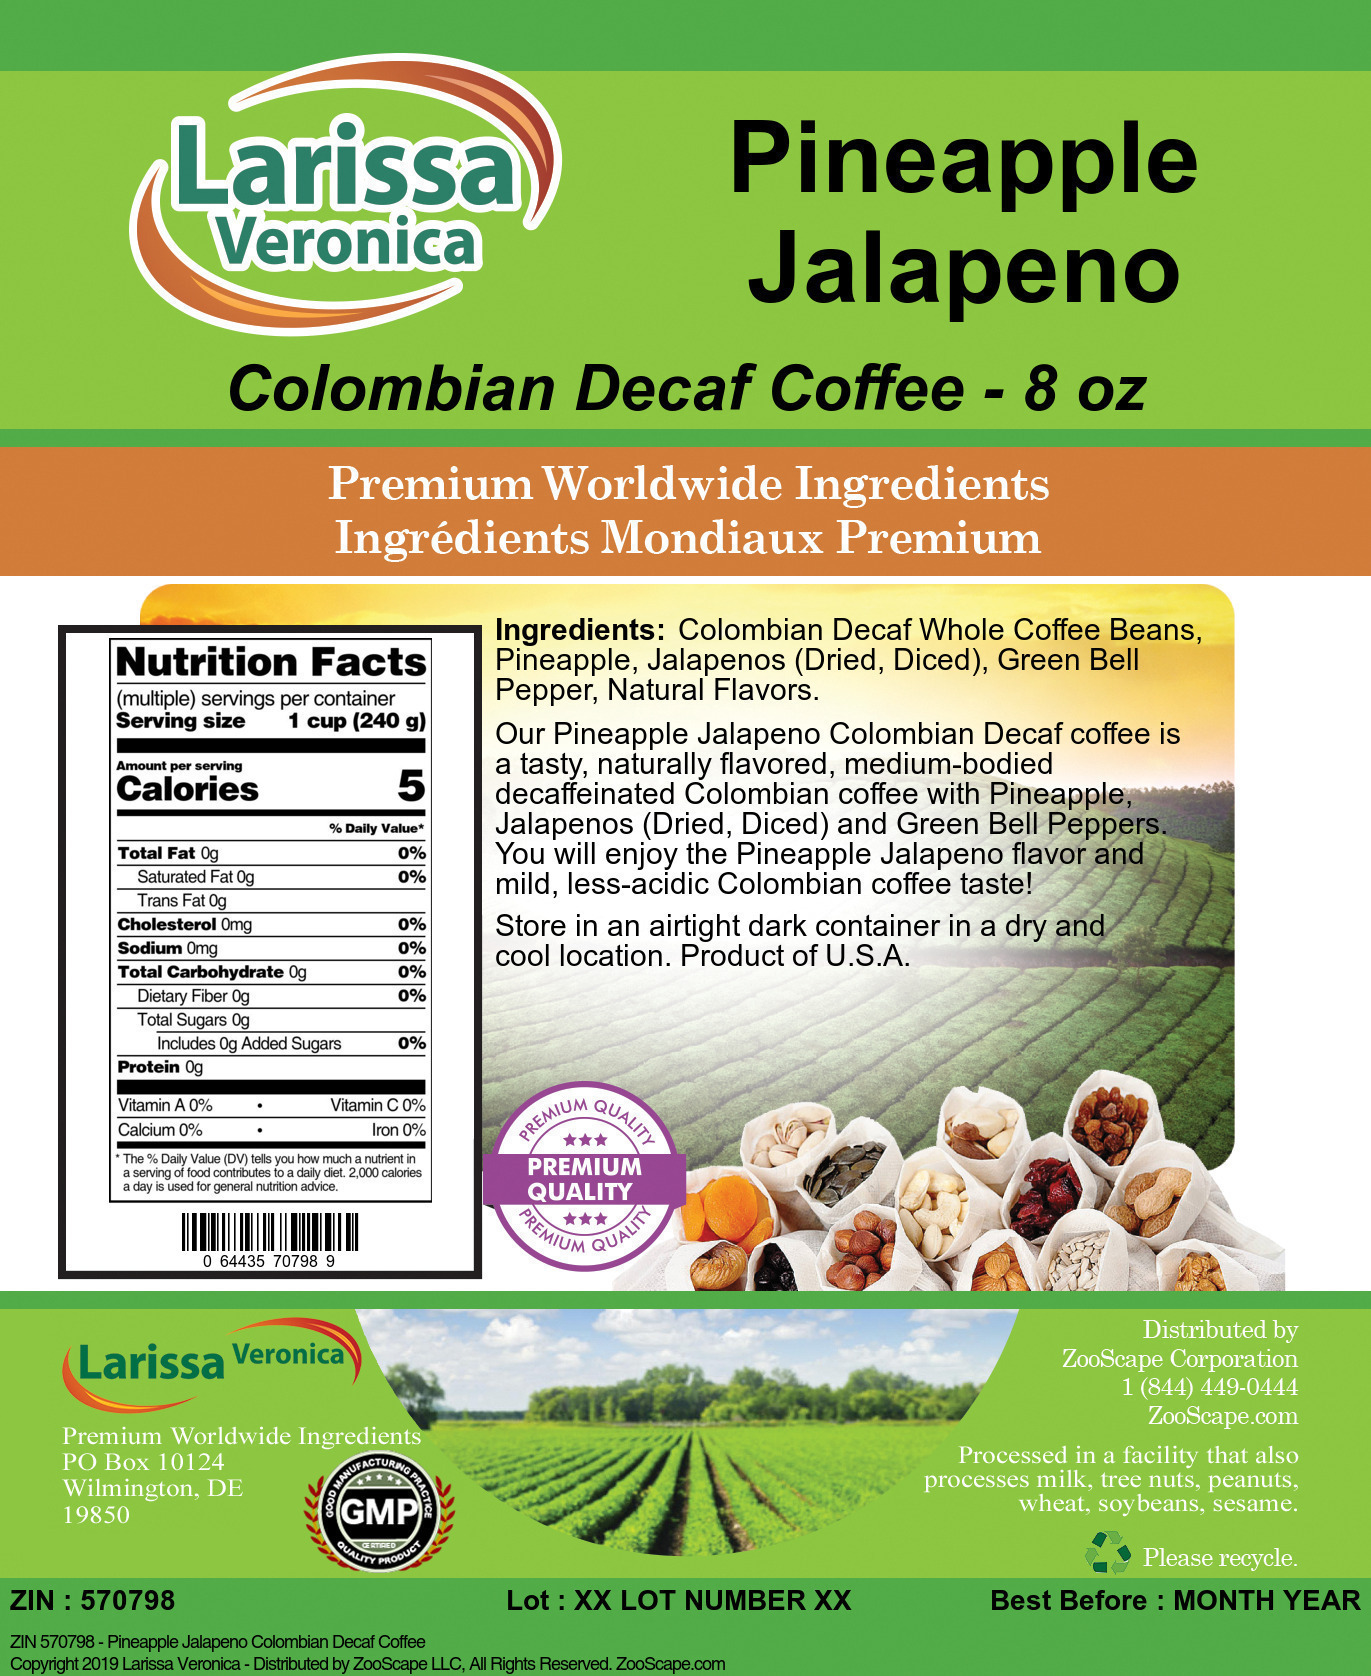 Pineapple Jalapeno Colombian Decaf Coffee - Label